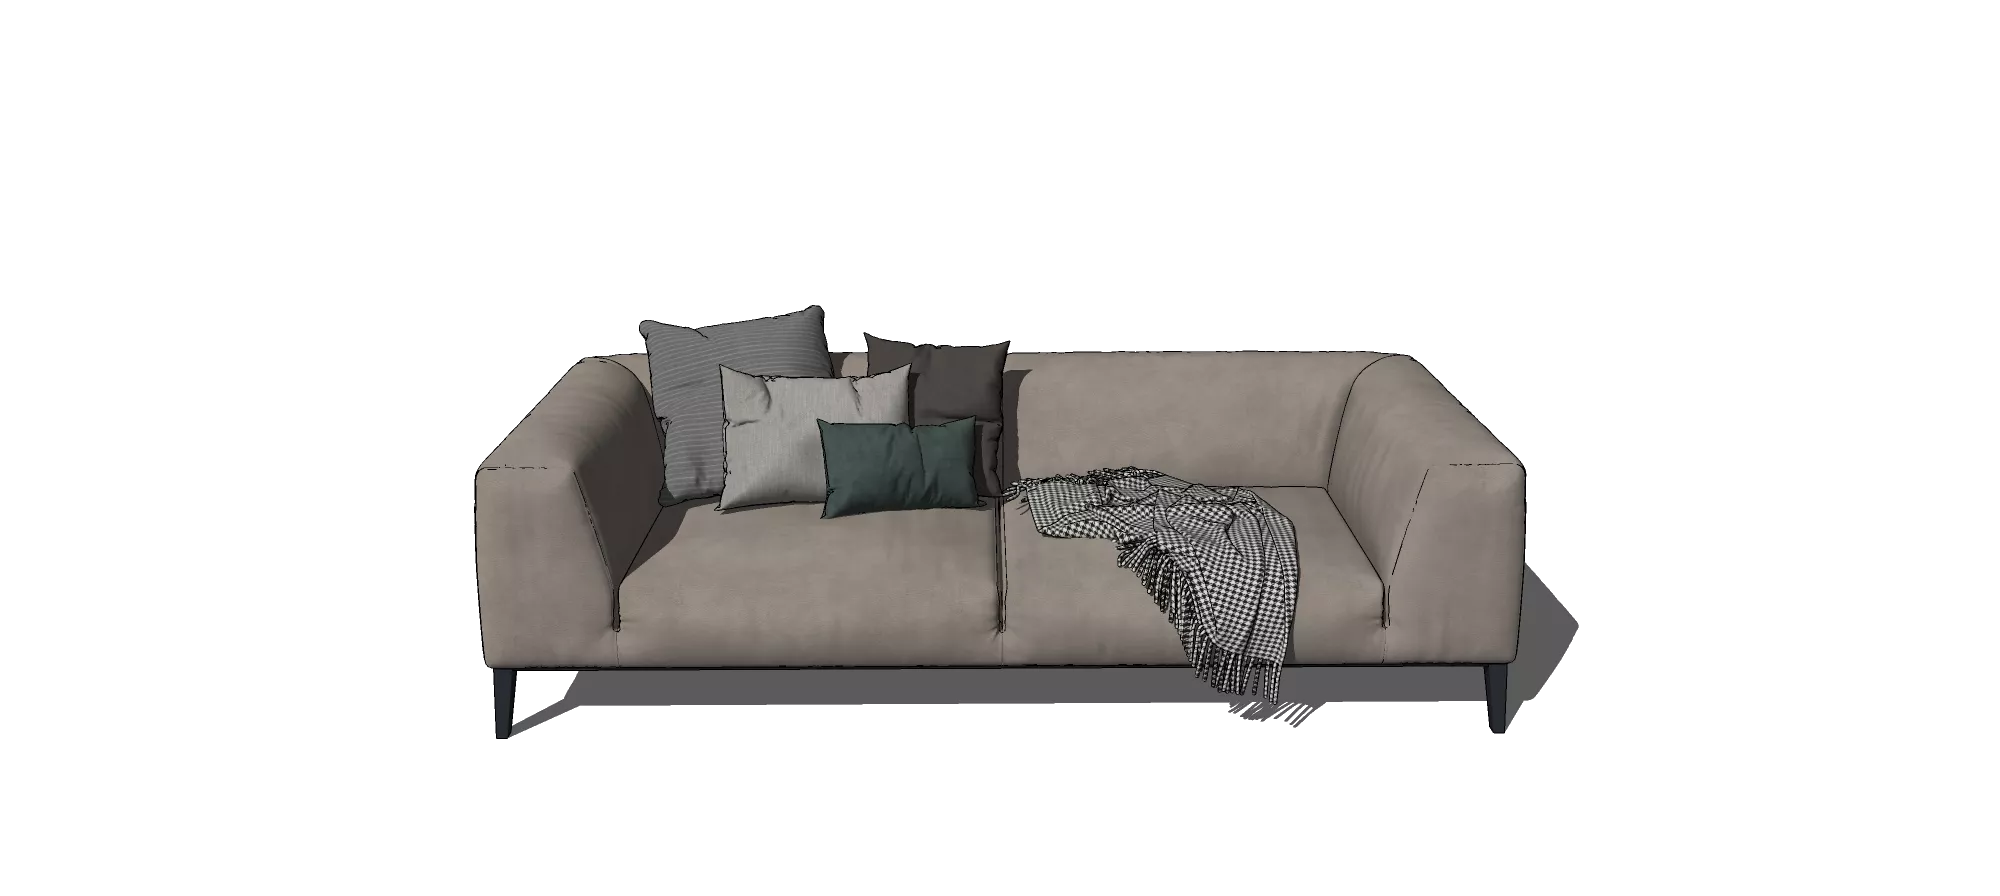 MODERN SOFA - SKETCHUP 3D MODEL - VRAY OR ENSCAPE - ID13109